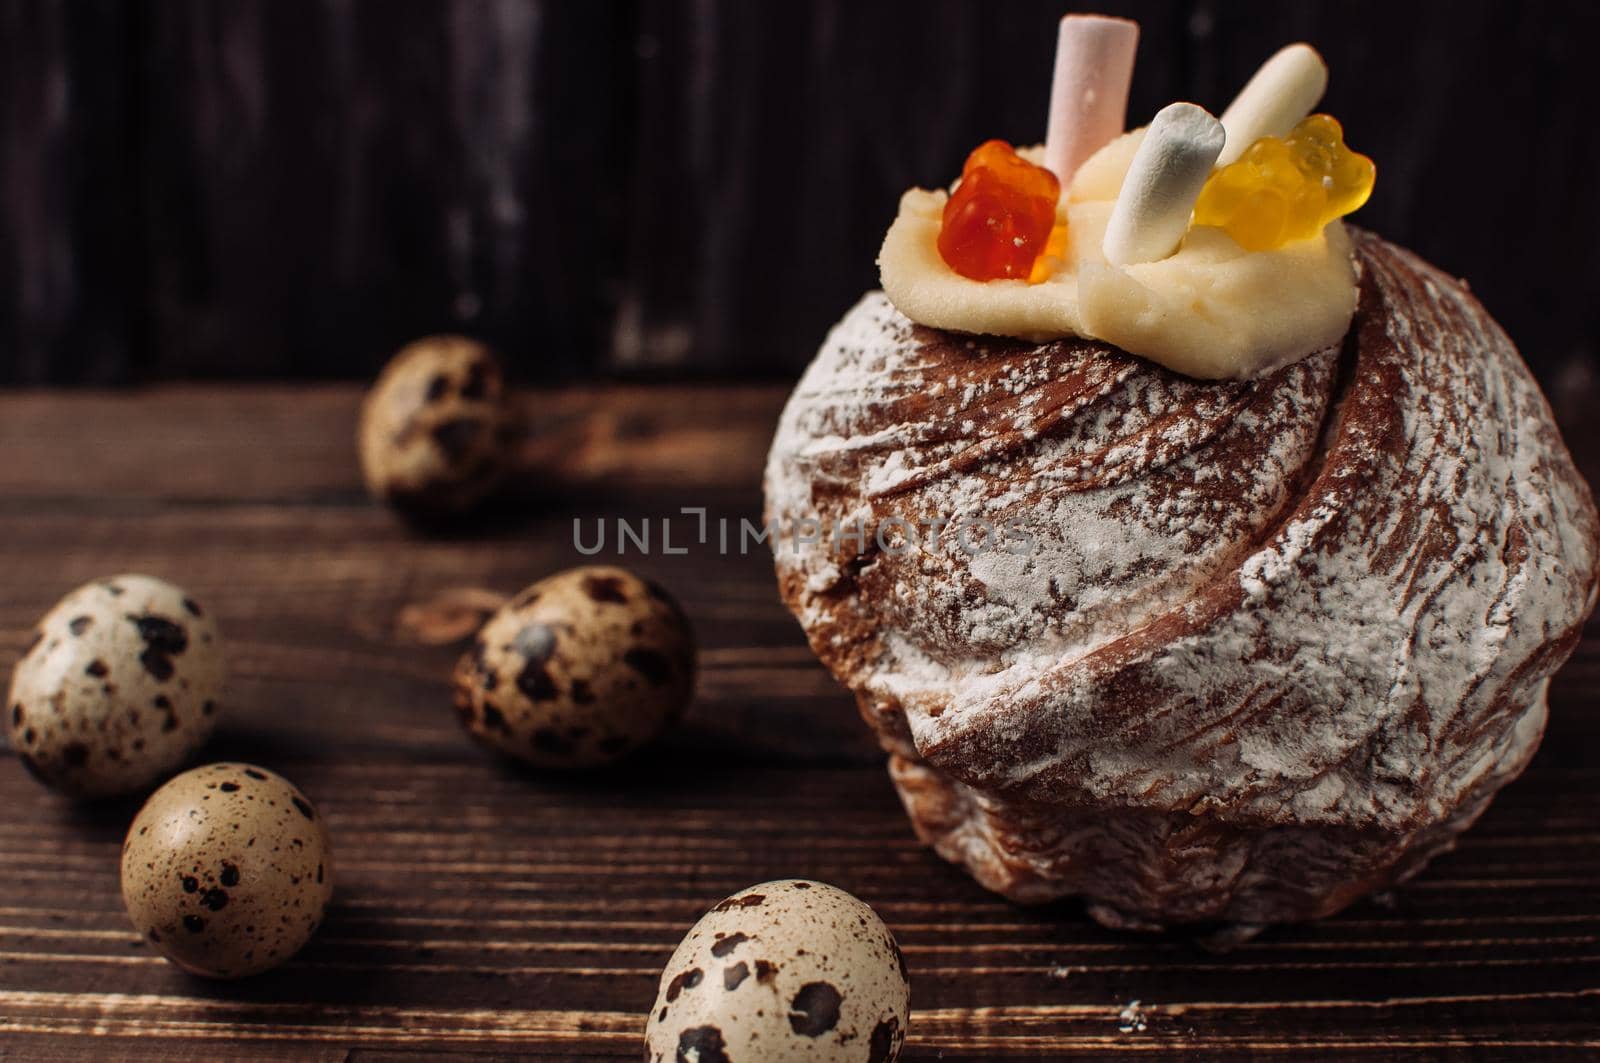 Stylish Easter cake with marshmallows and jelly bears on dark rustic wooden background,quail eggs lie nearby.Seasonal Greetings Happy Easter. place for text. Selective focus. modern happy easter image